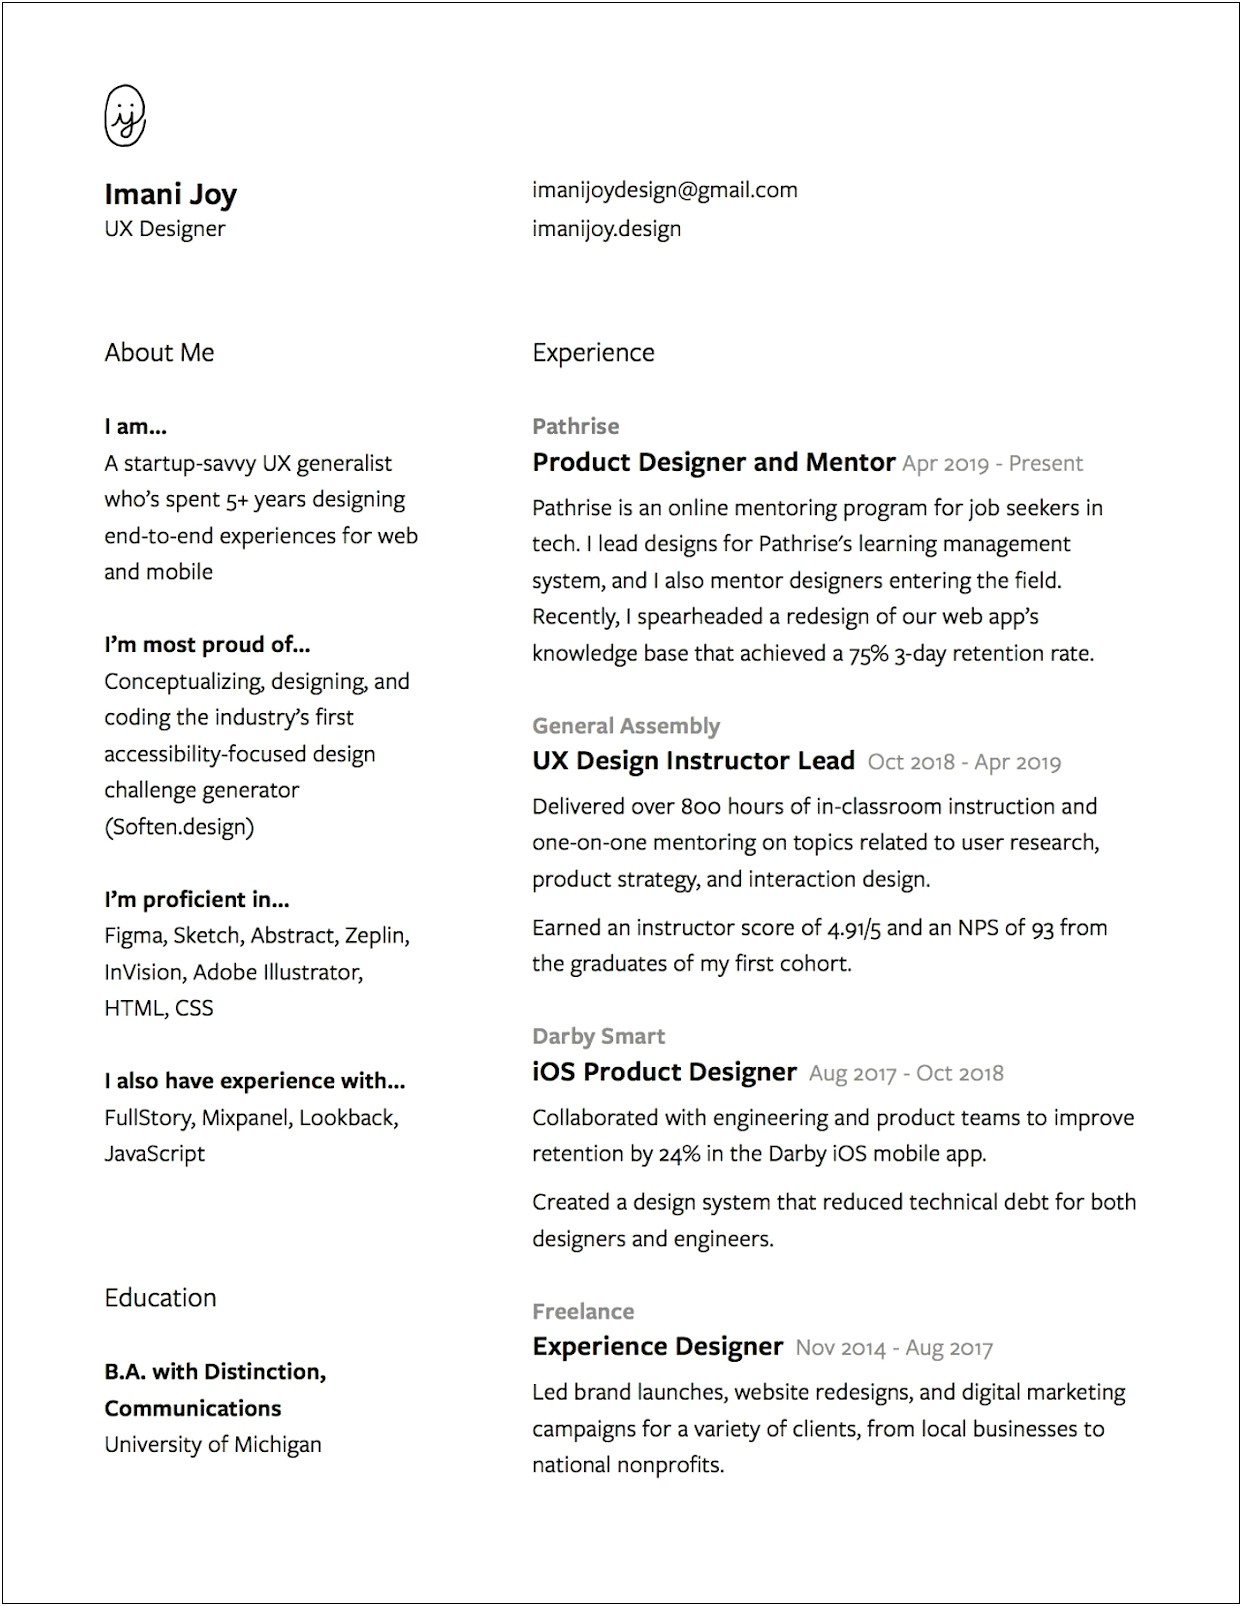 About Me Section Resume Examples